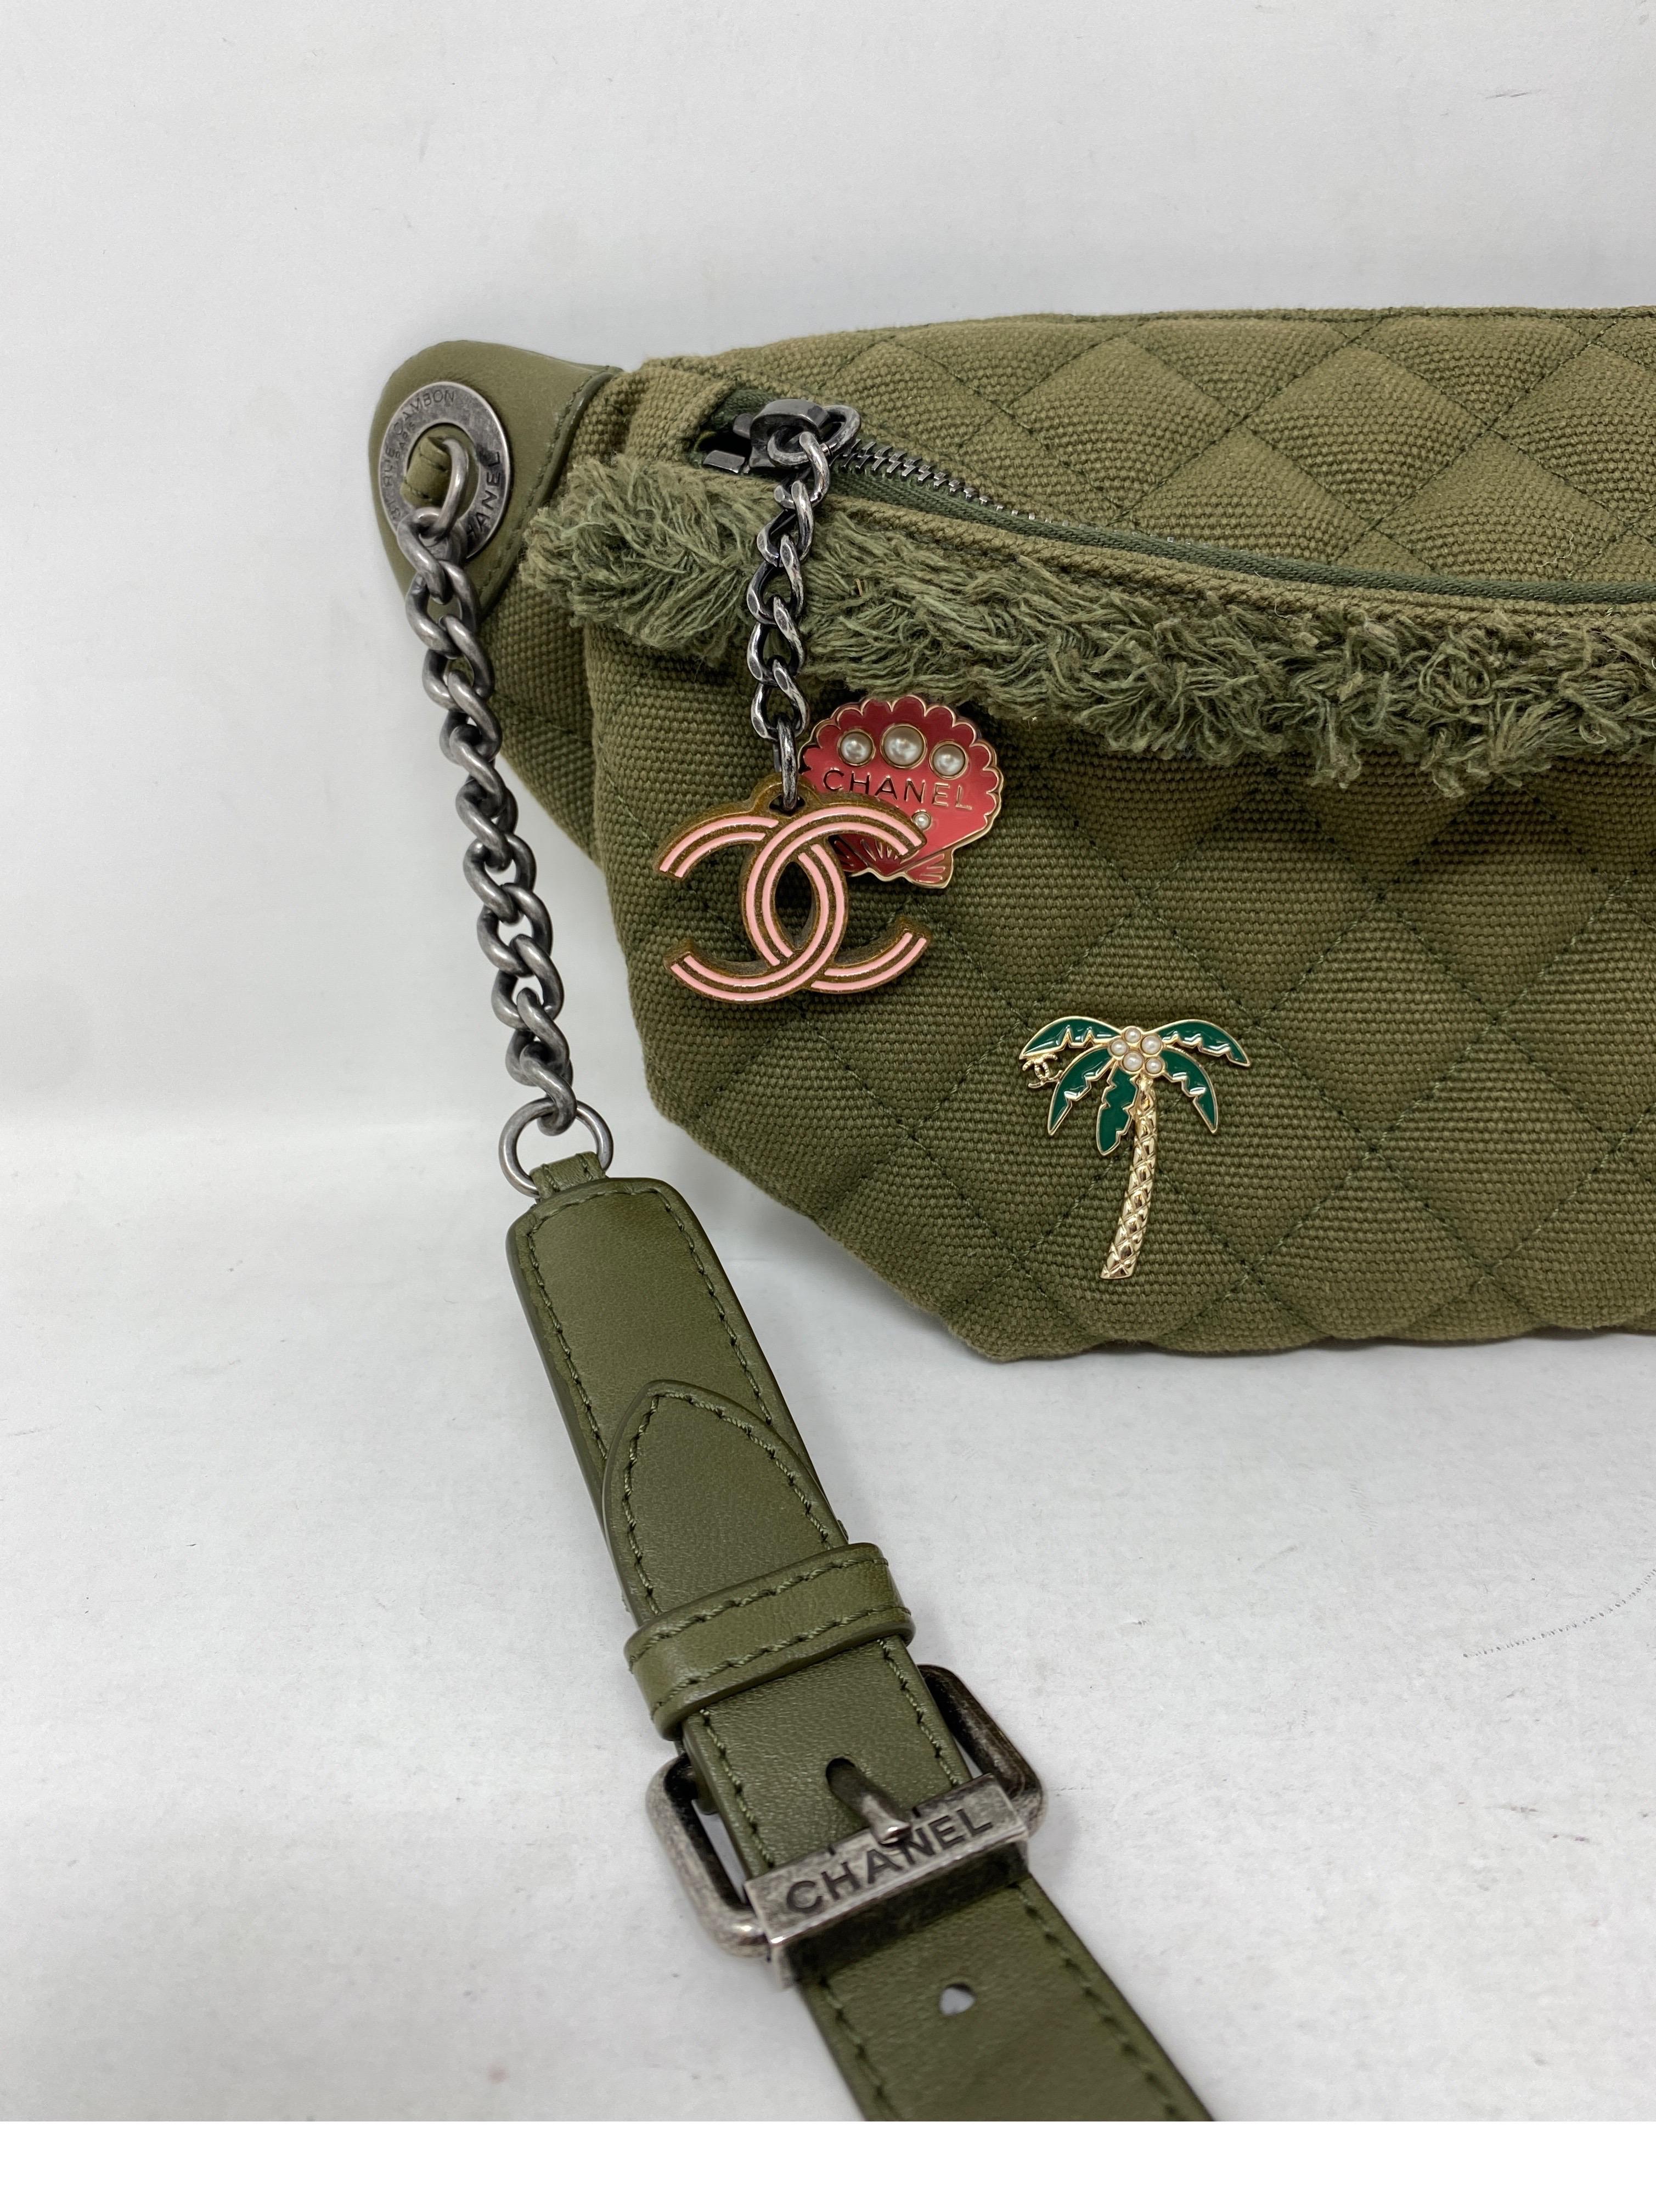 Chanel Fanny Pack. Green Canvas with Summer pins. Cuban collection. Tropical feel pins by Chanel. Khaki canvas with leather strap. Can be worn as a crossbody or a belt bag. Mint like new condition. Guaranteed authentic. 